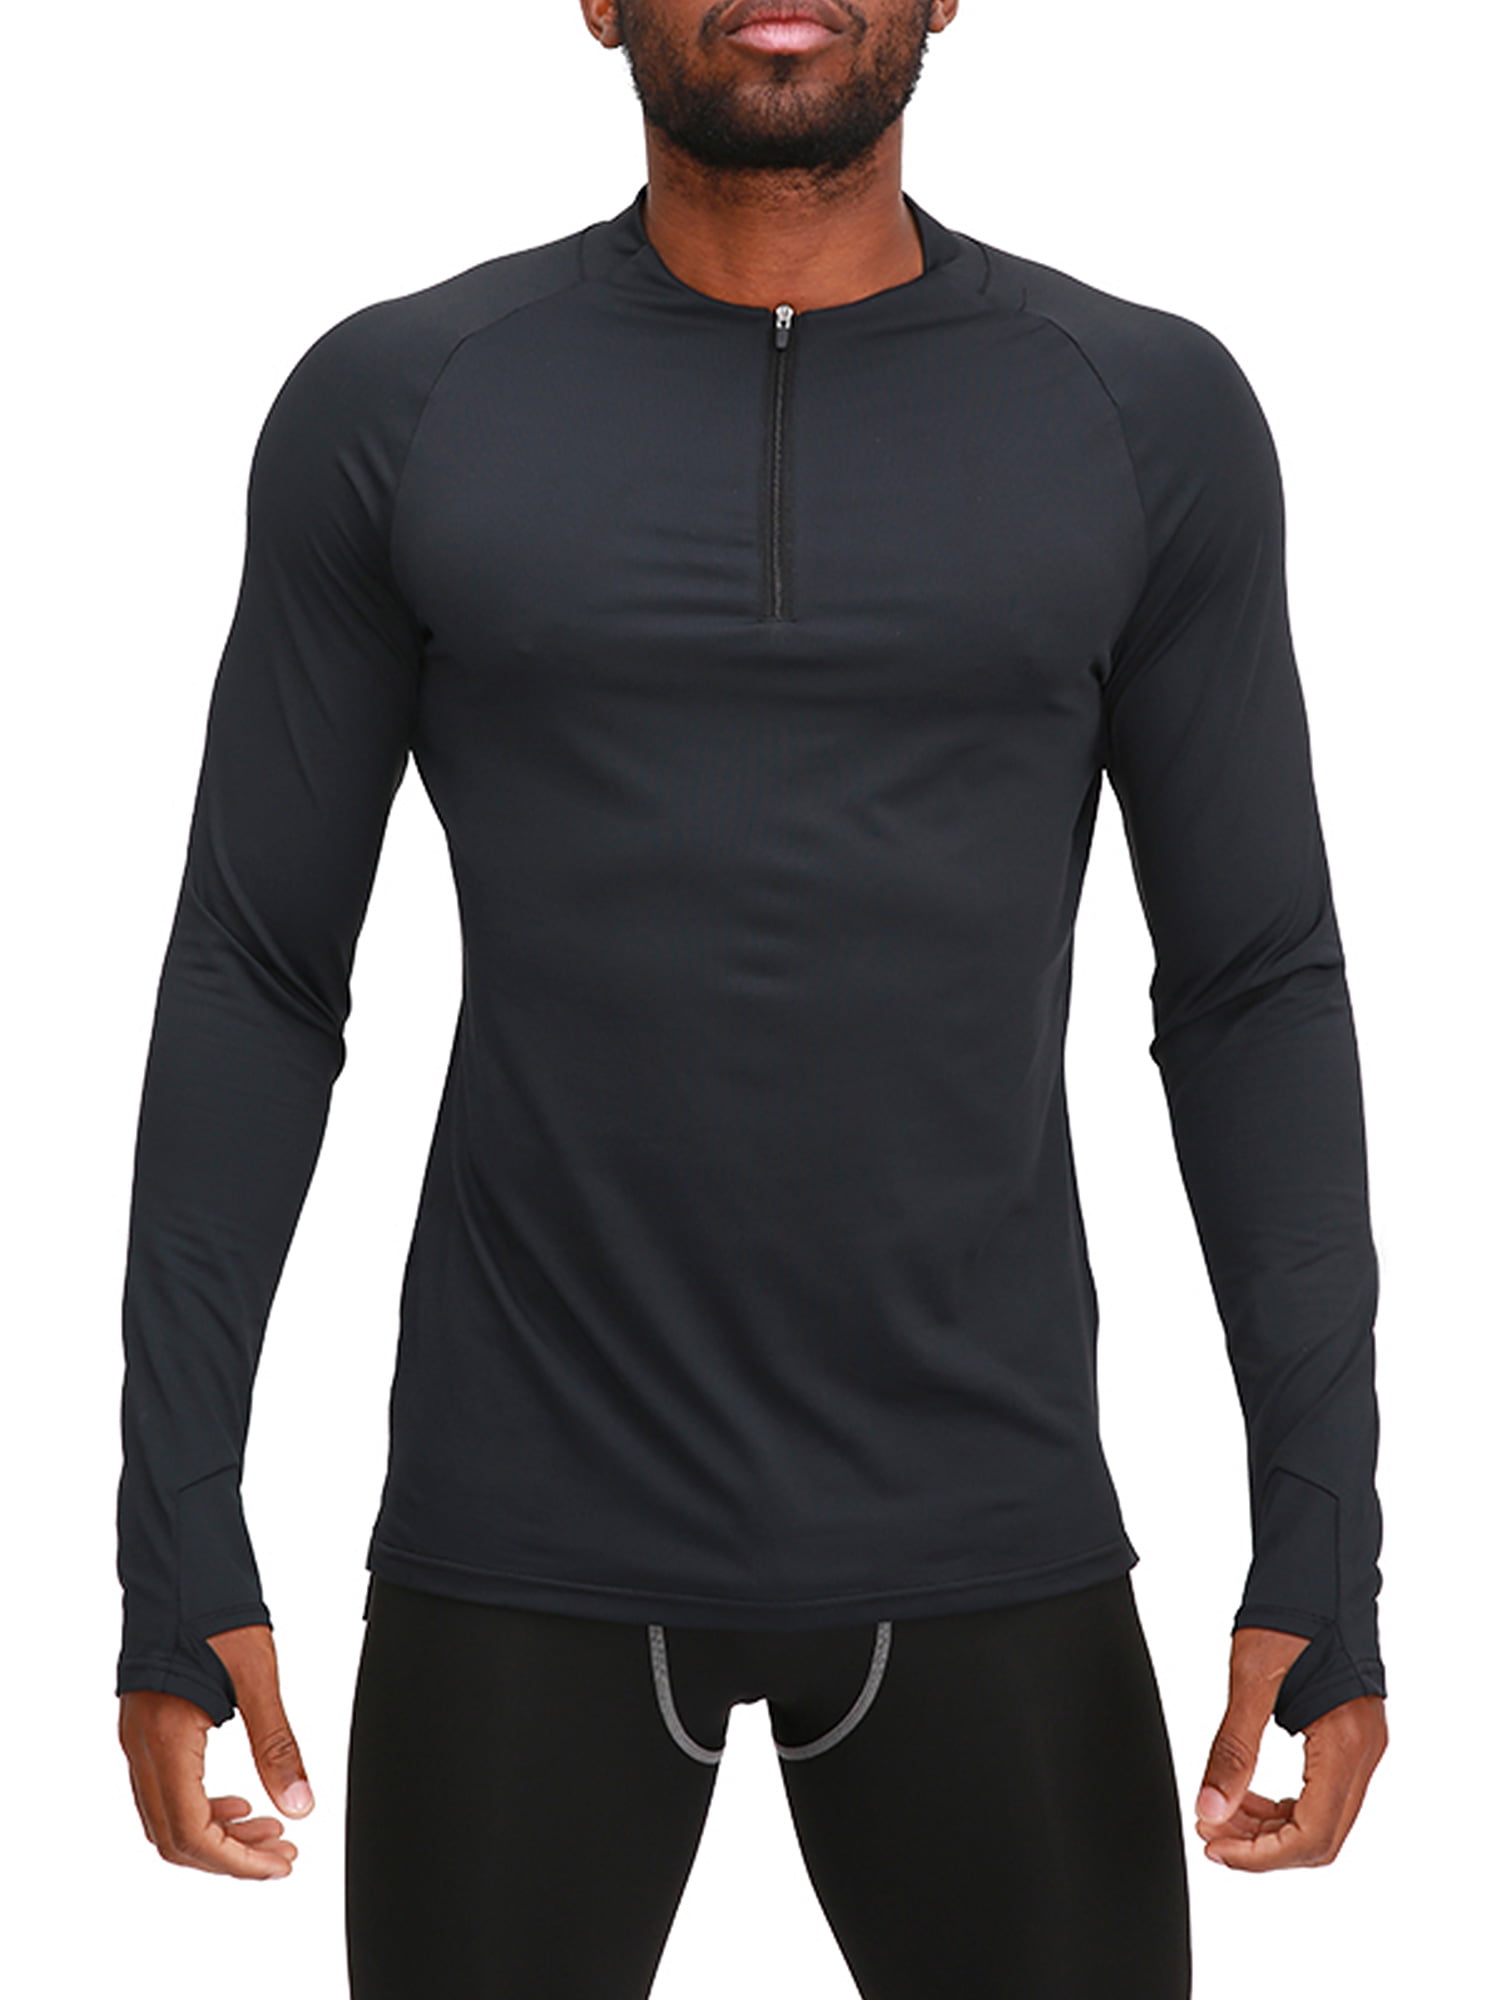 Men's Compression Shirt Running Shirt Long Sleeve Sweatshirt Athletic  Spandex Breathable Quick Dry Moisture Wicking Gym Workout Running Active  Training Sportswe…